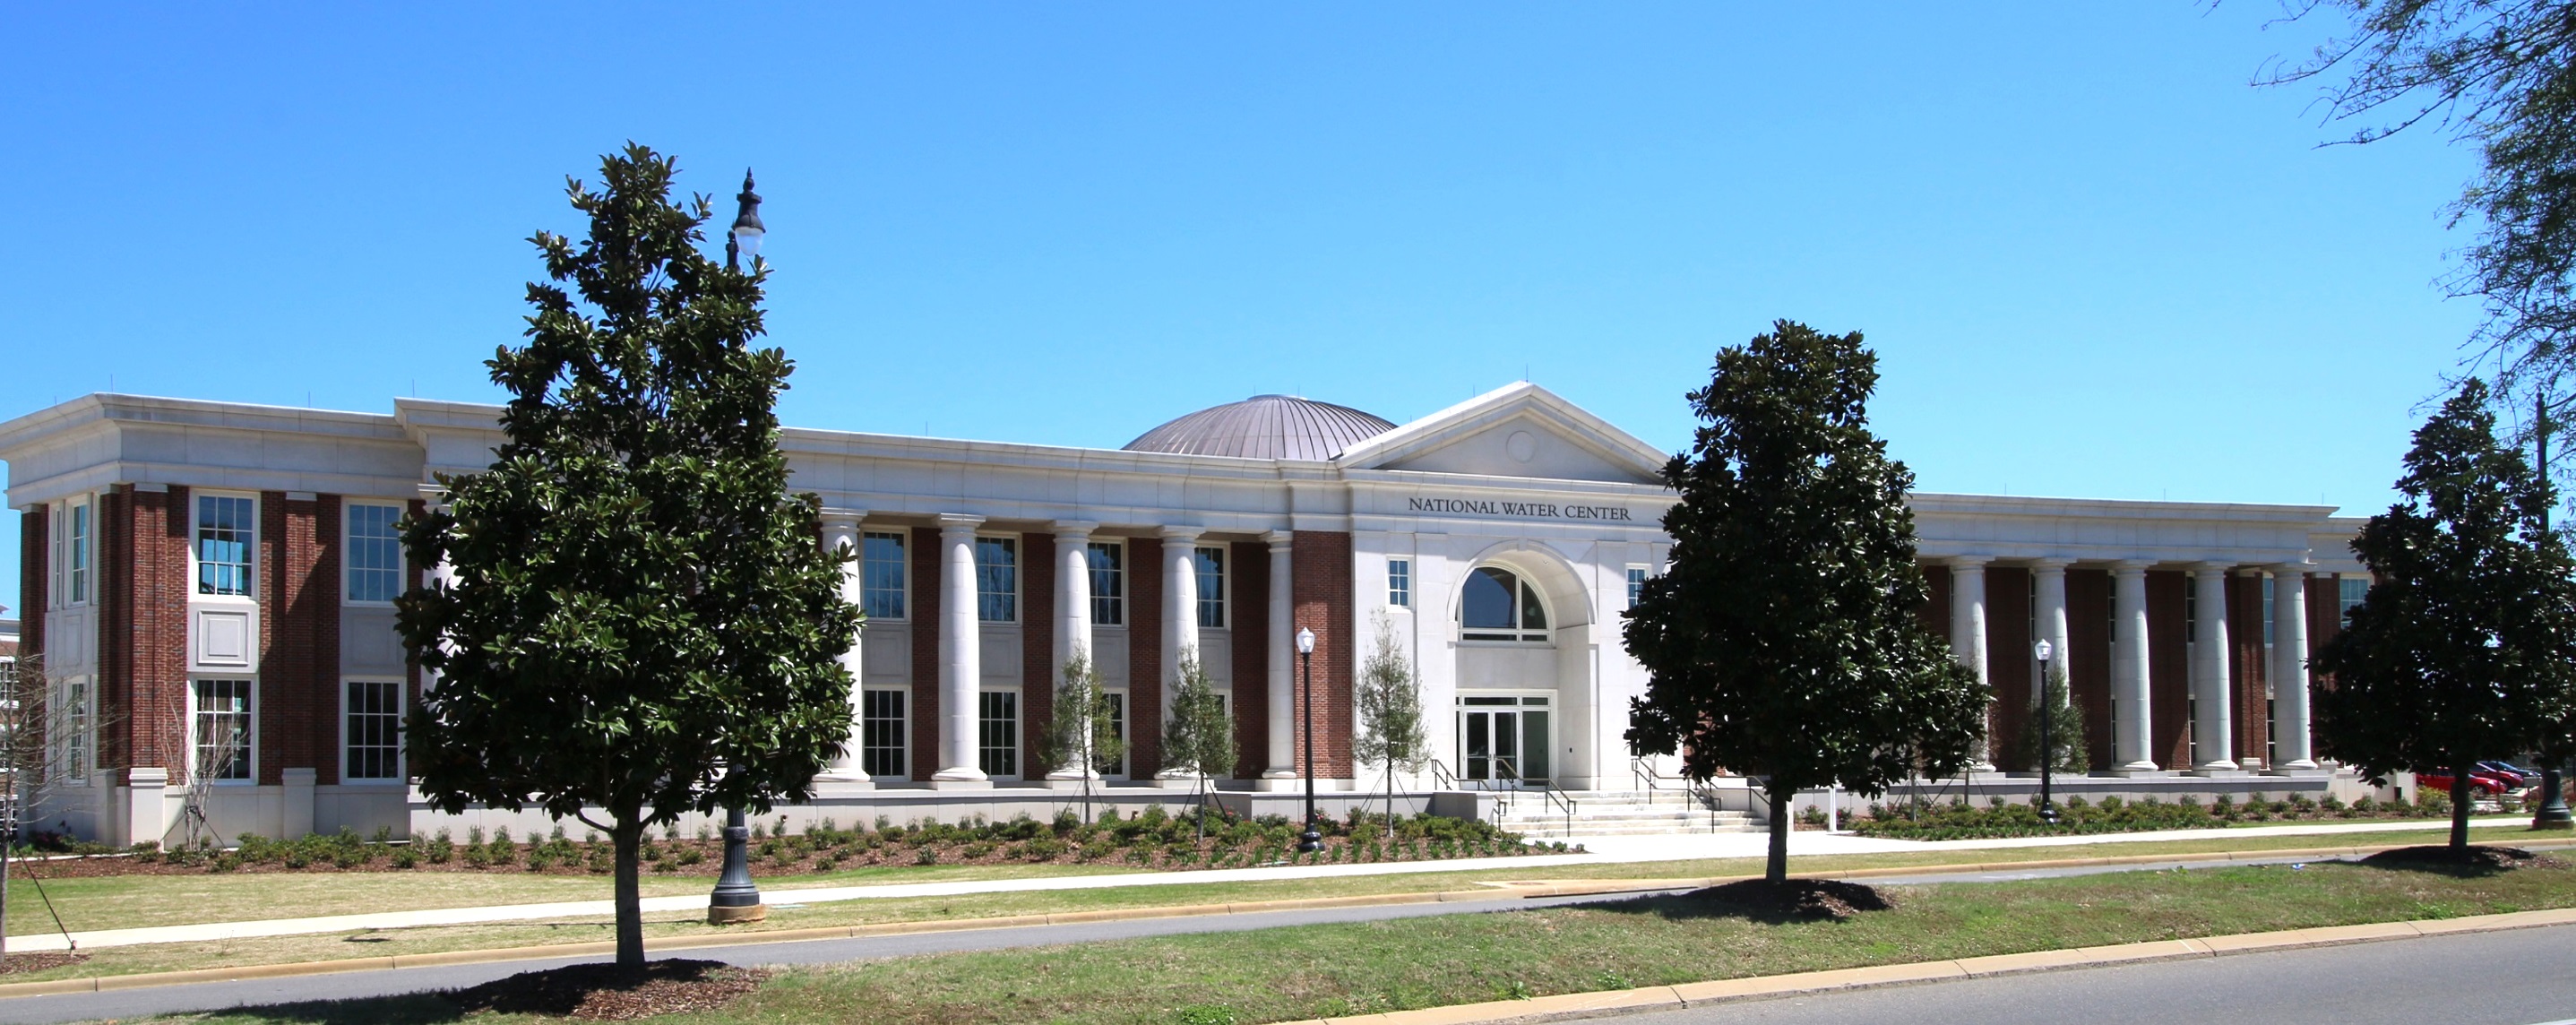 The National Water Center (NWC), in Tuscaloosa, Alabama, is a world-class facility that enables NOAA, in partnership with other federal agencies, to deliver a new generation of water information and services to the nation.